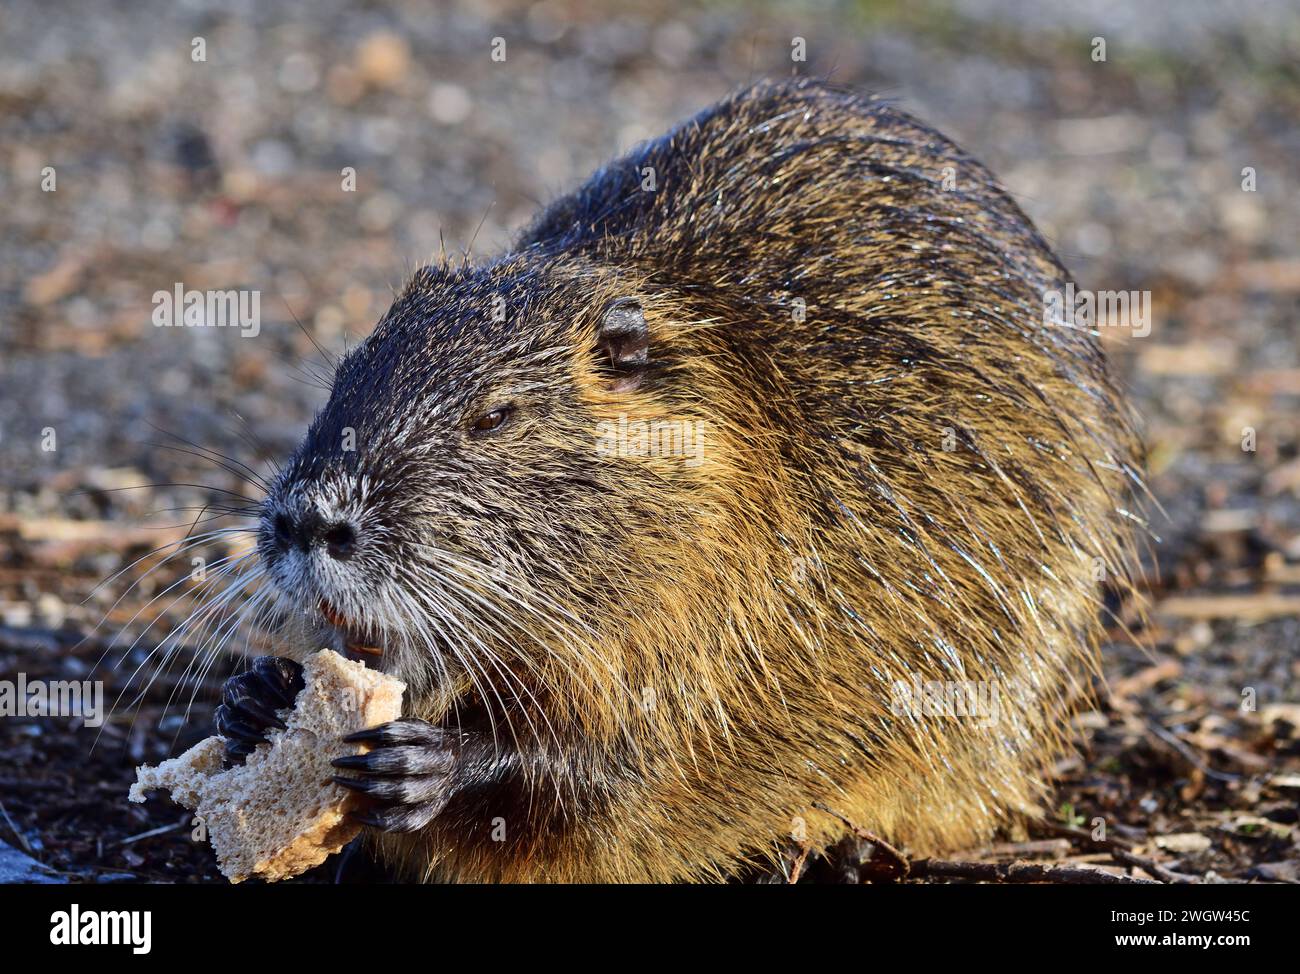 Nutria - Myocastor coypus eating by the stream in a Hungarian small town Stock Photo